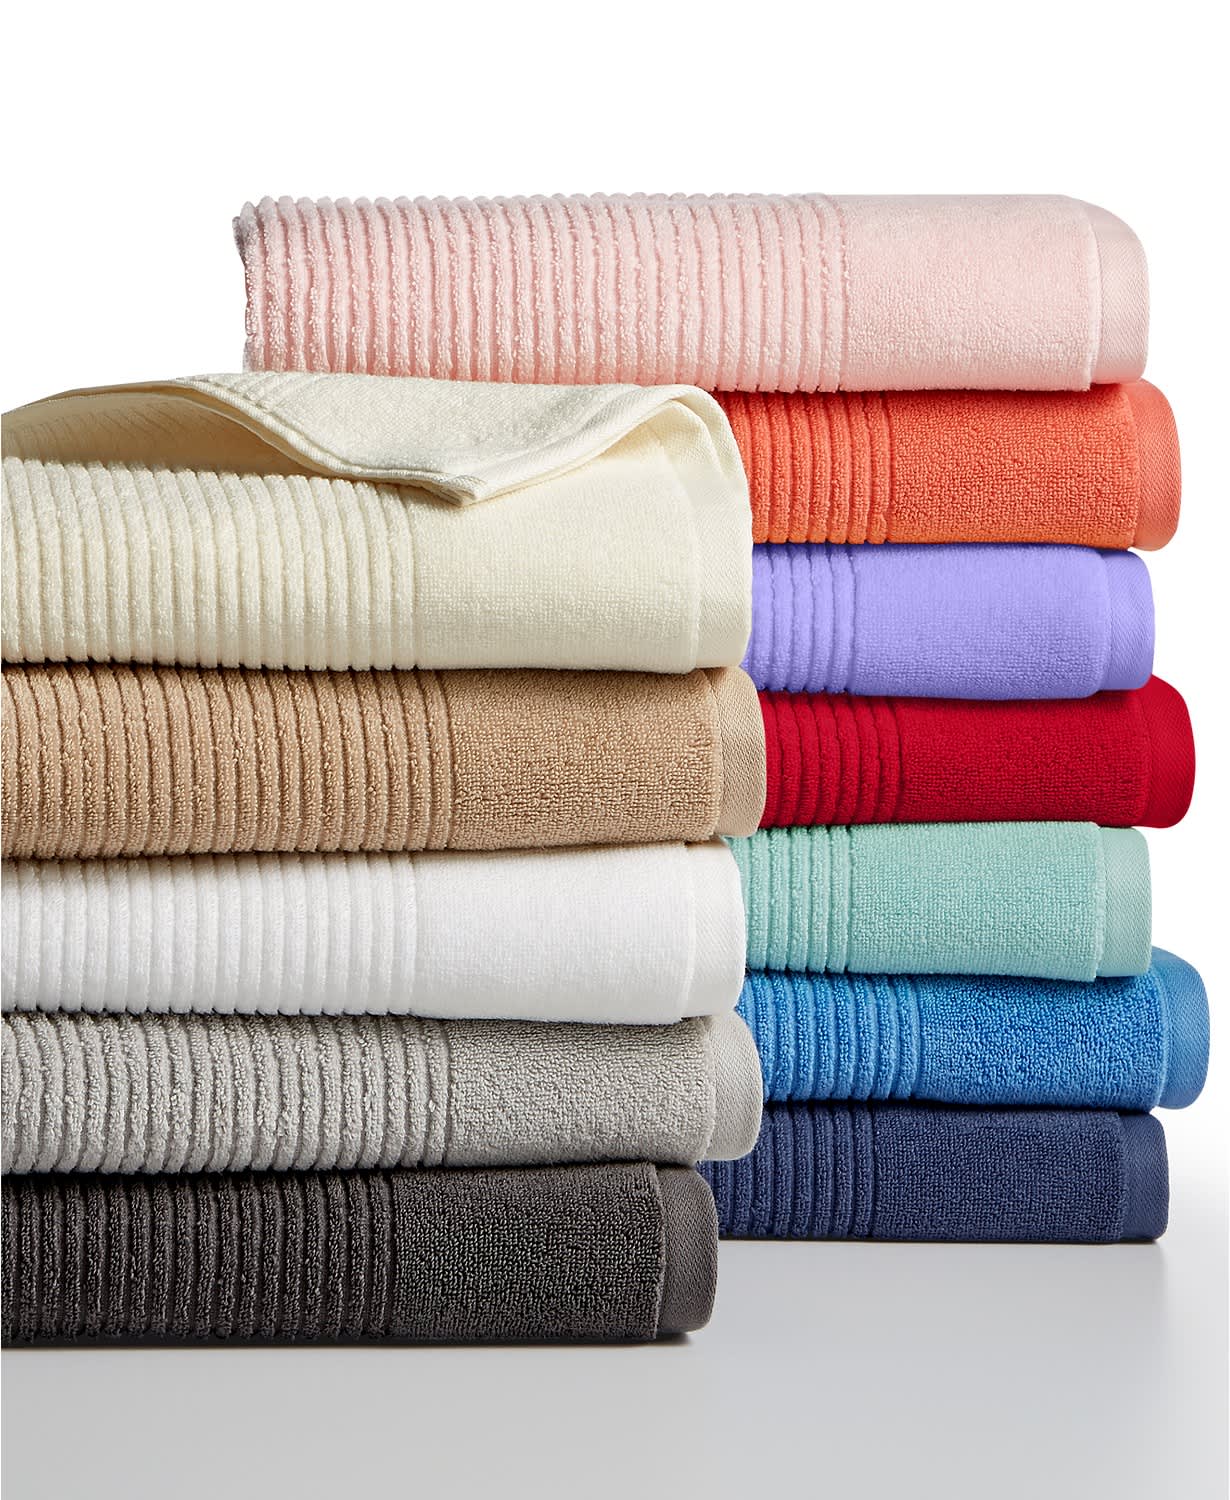 https://cdn.apartmenttherapy.info/image/upload/v1568135502/at/product%20listing/martha_stewart_quick_dry_towel.jpg